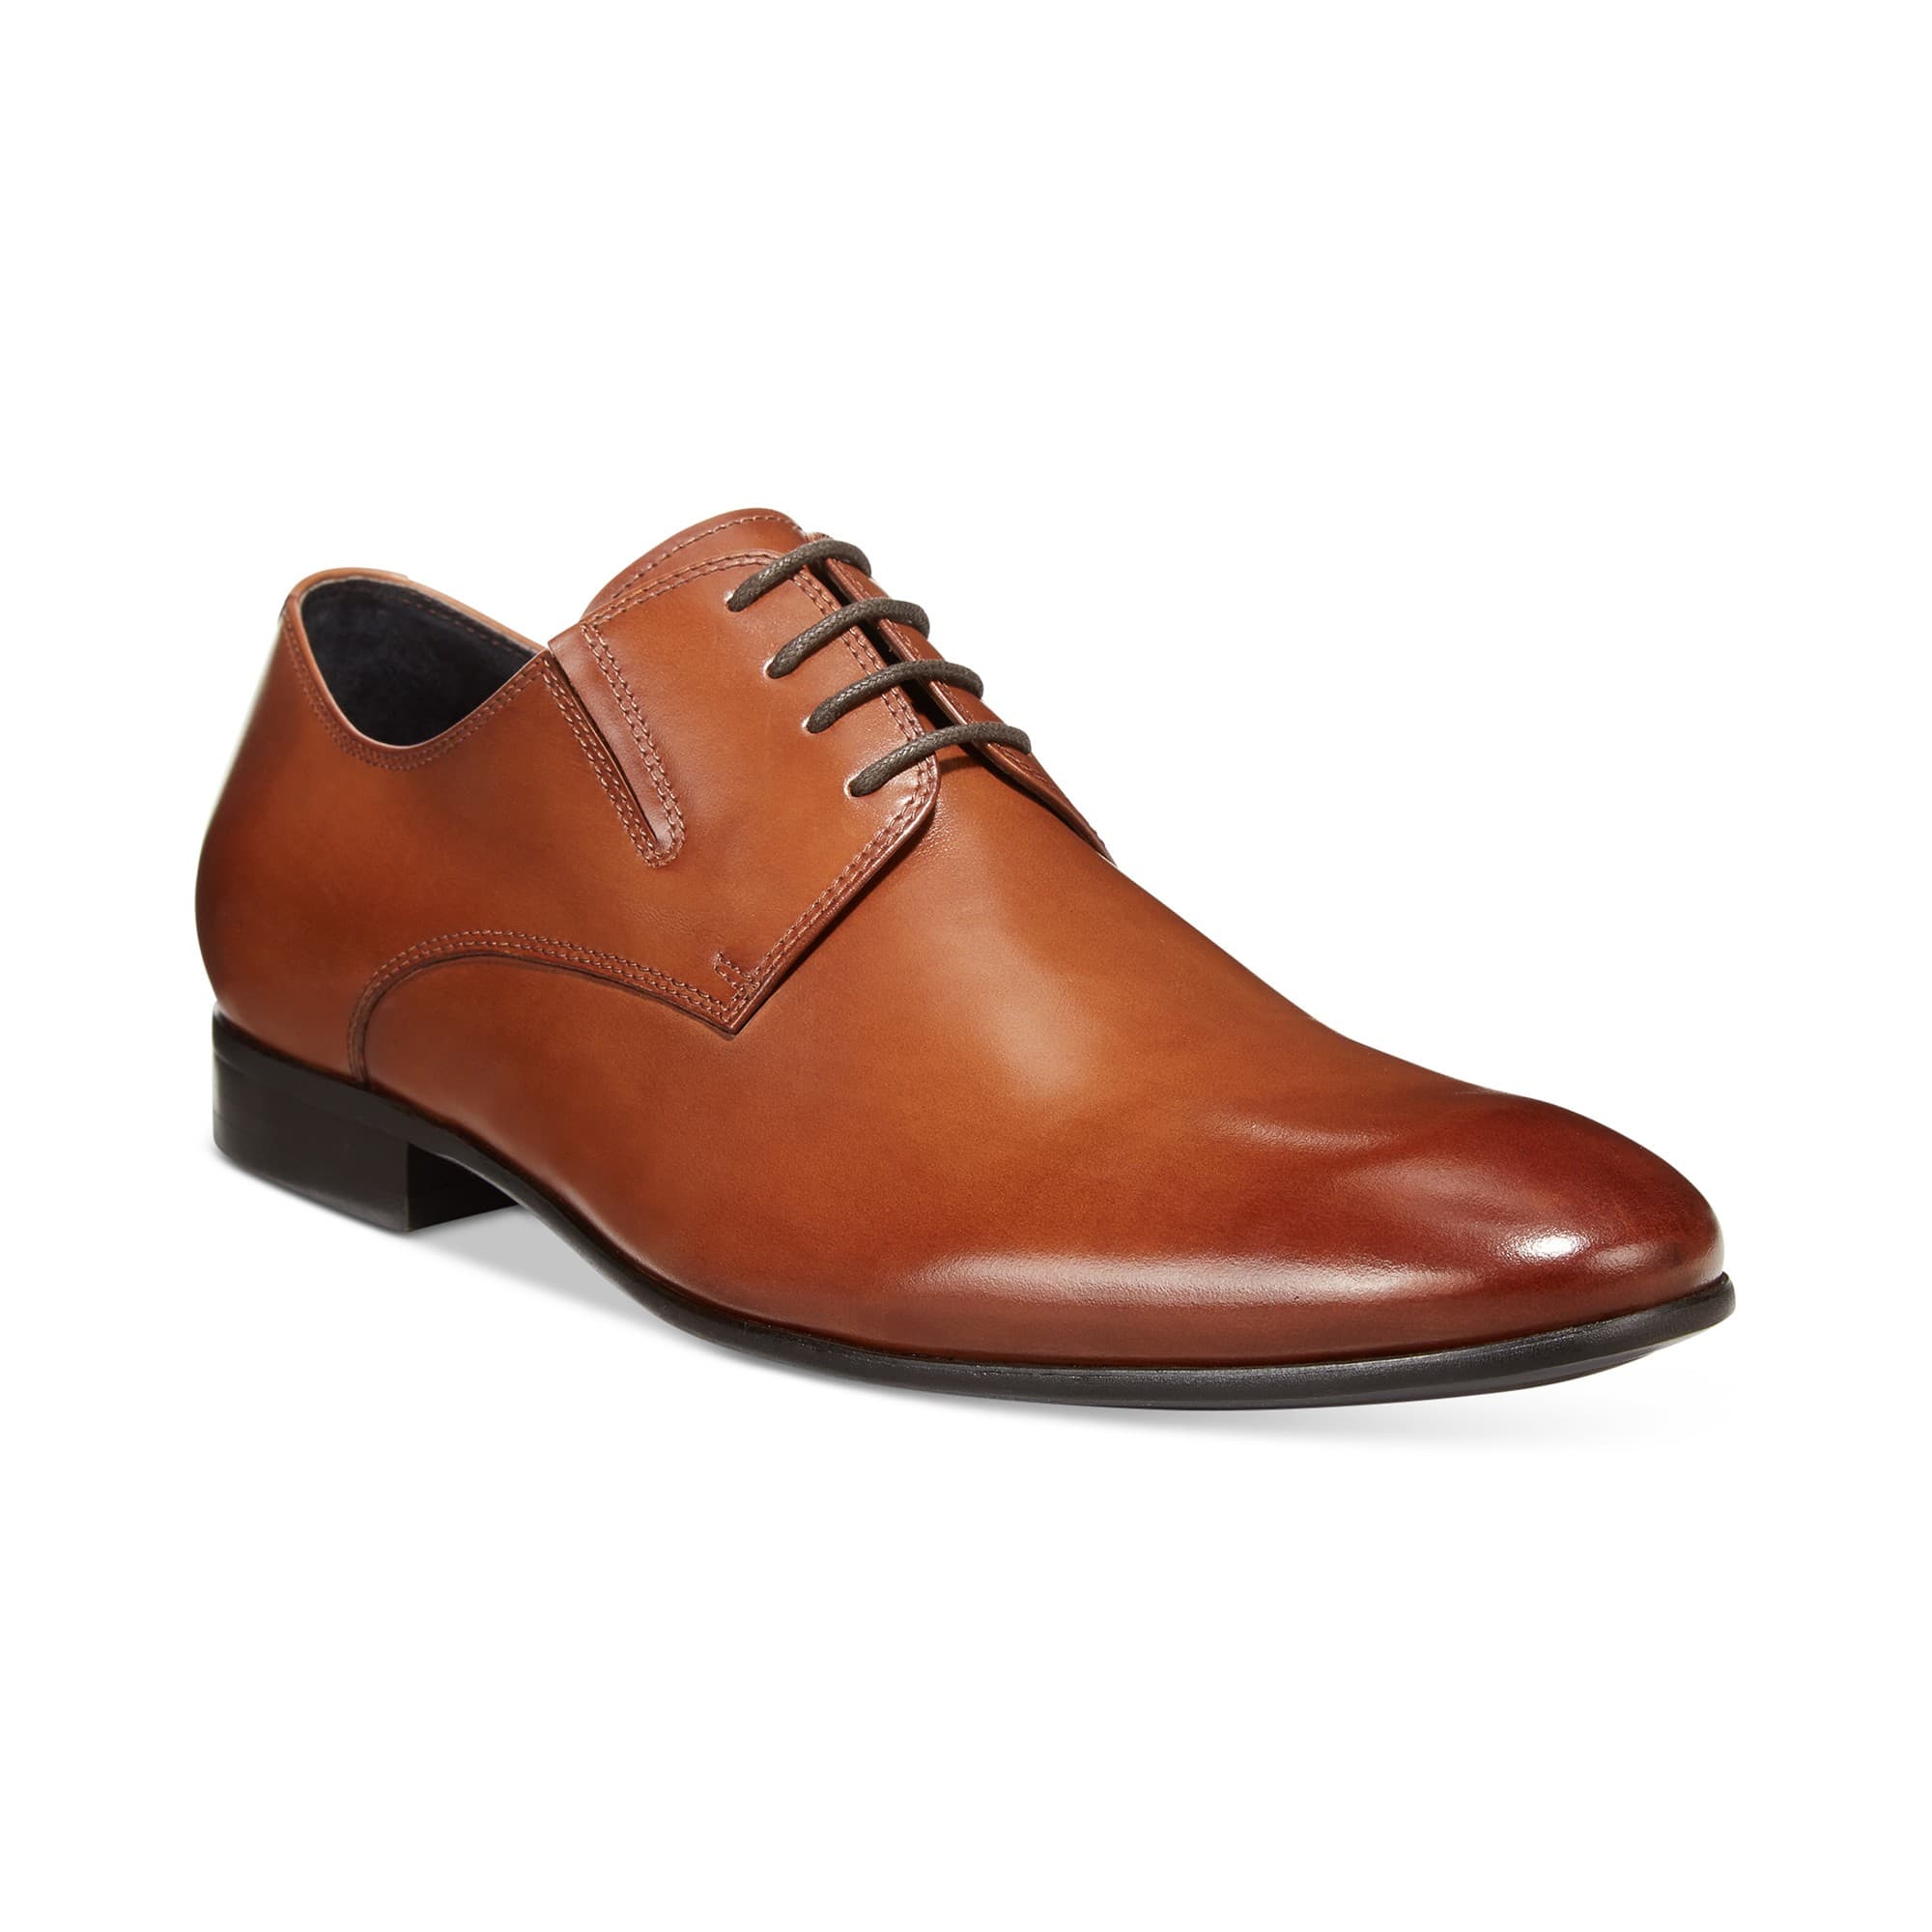 woocommerce-673321-2209615.cloudwaysapps.com-kenneth-cole-new-york-mens-brown-leather-mix-er-oxfords-shoes